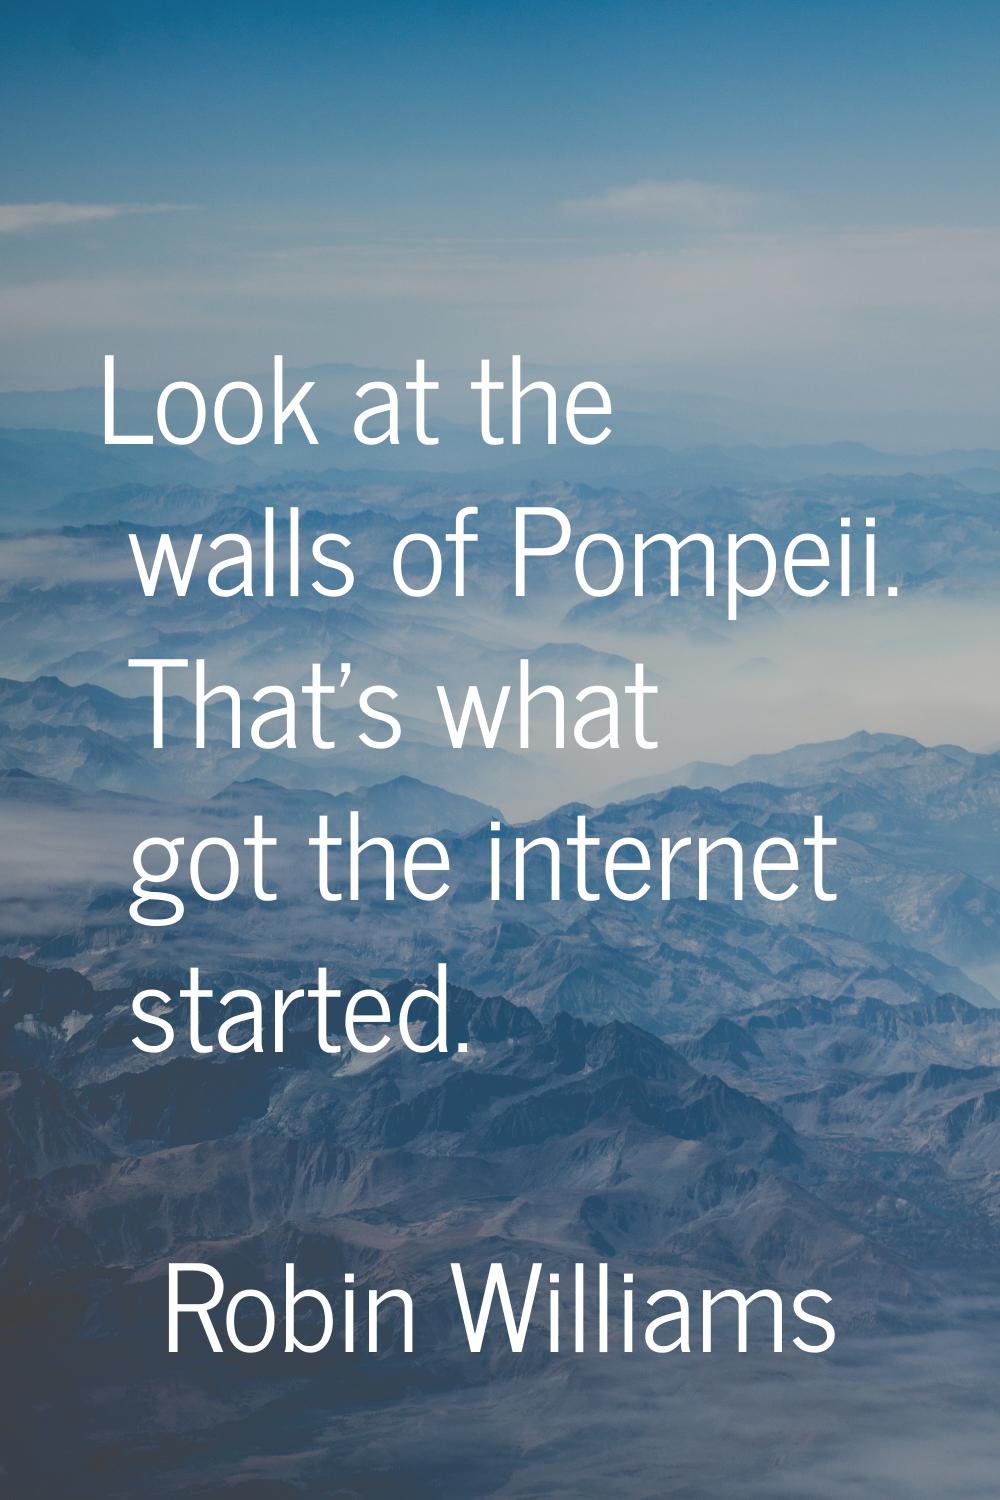 Look at the walls of Pompeii. That's what got the internet started.